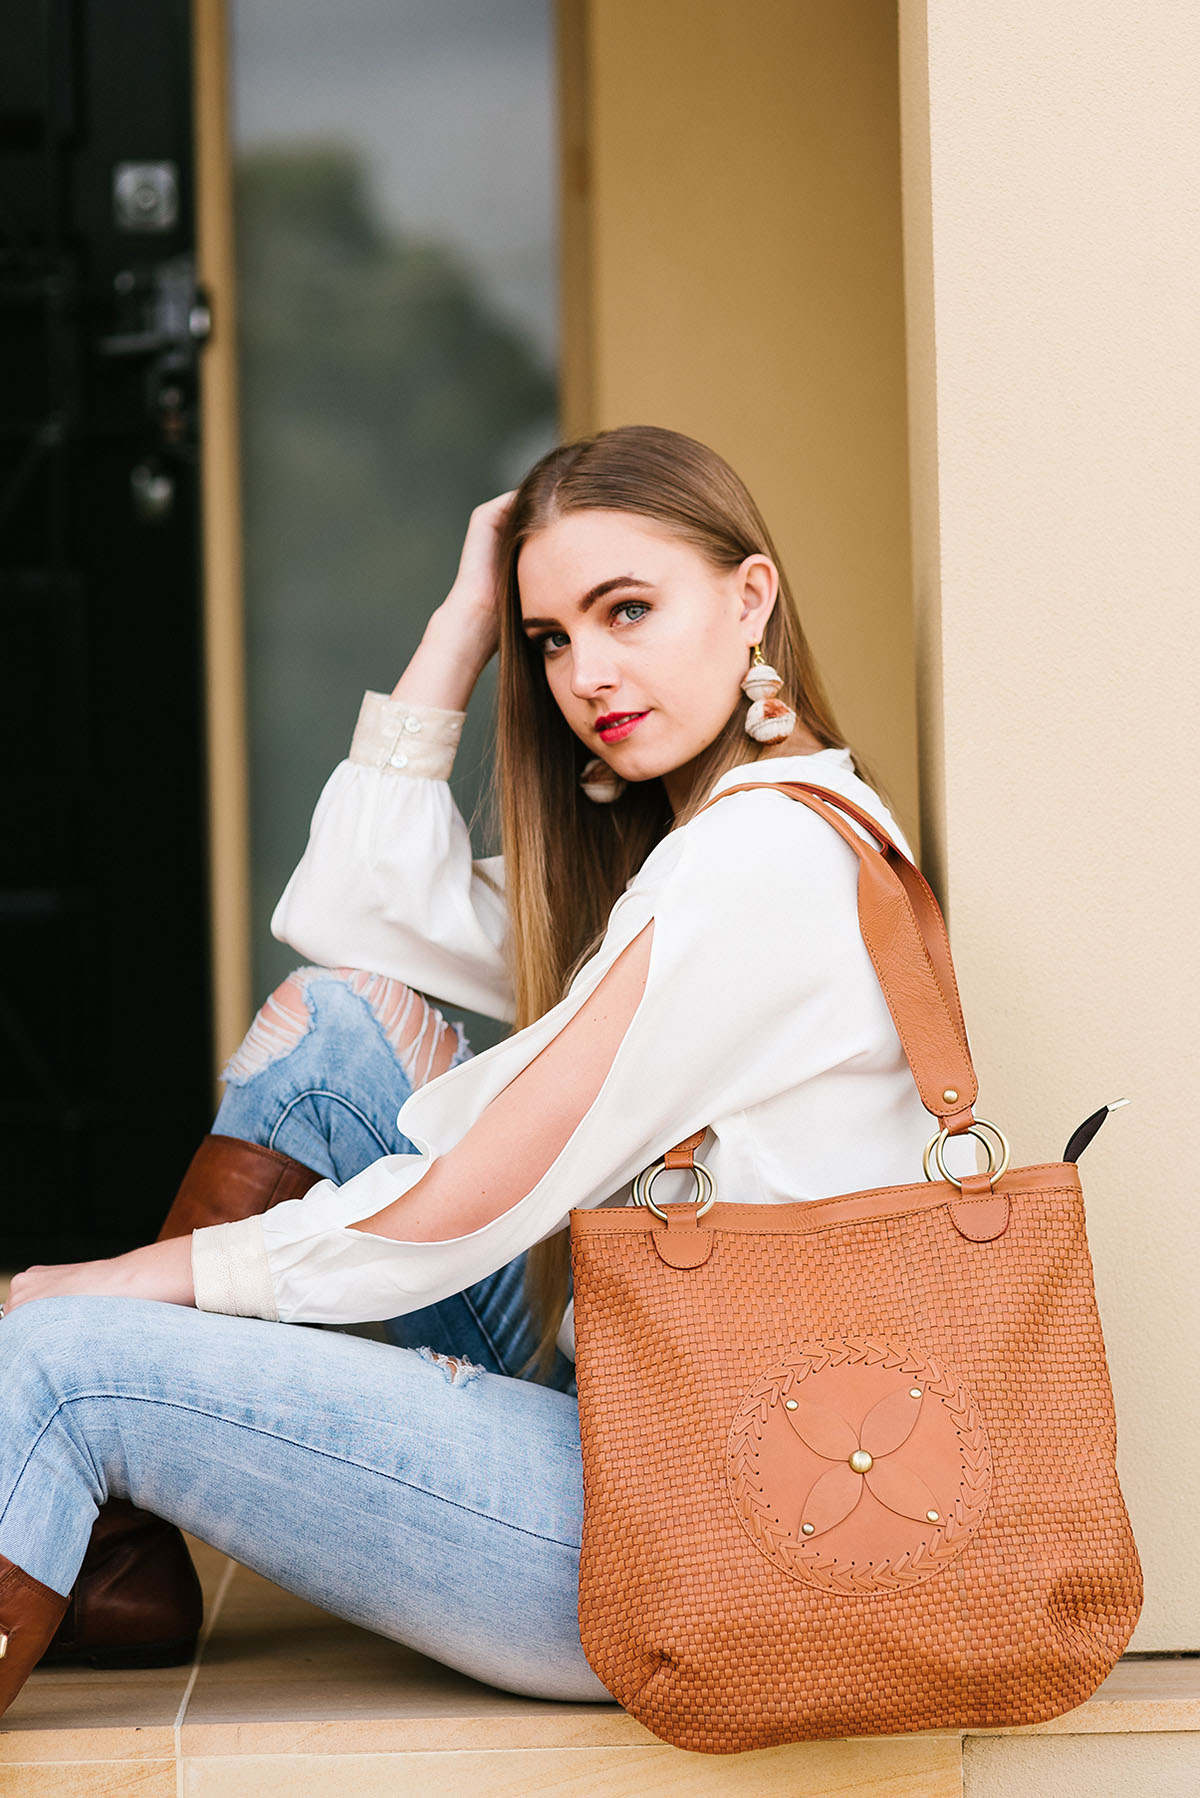 Wholesale Handbags in China: Top 15 Suppliers You Should Know About